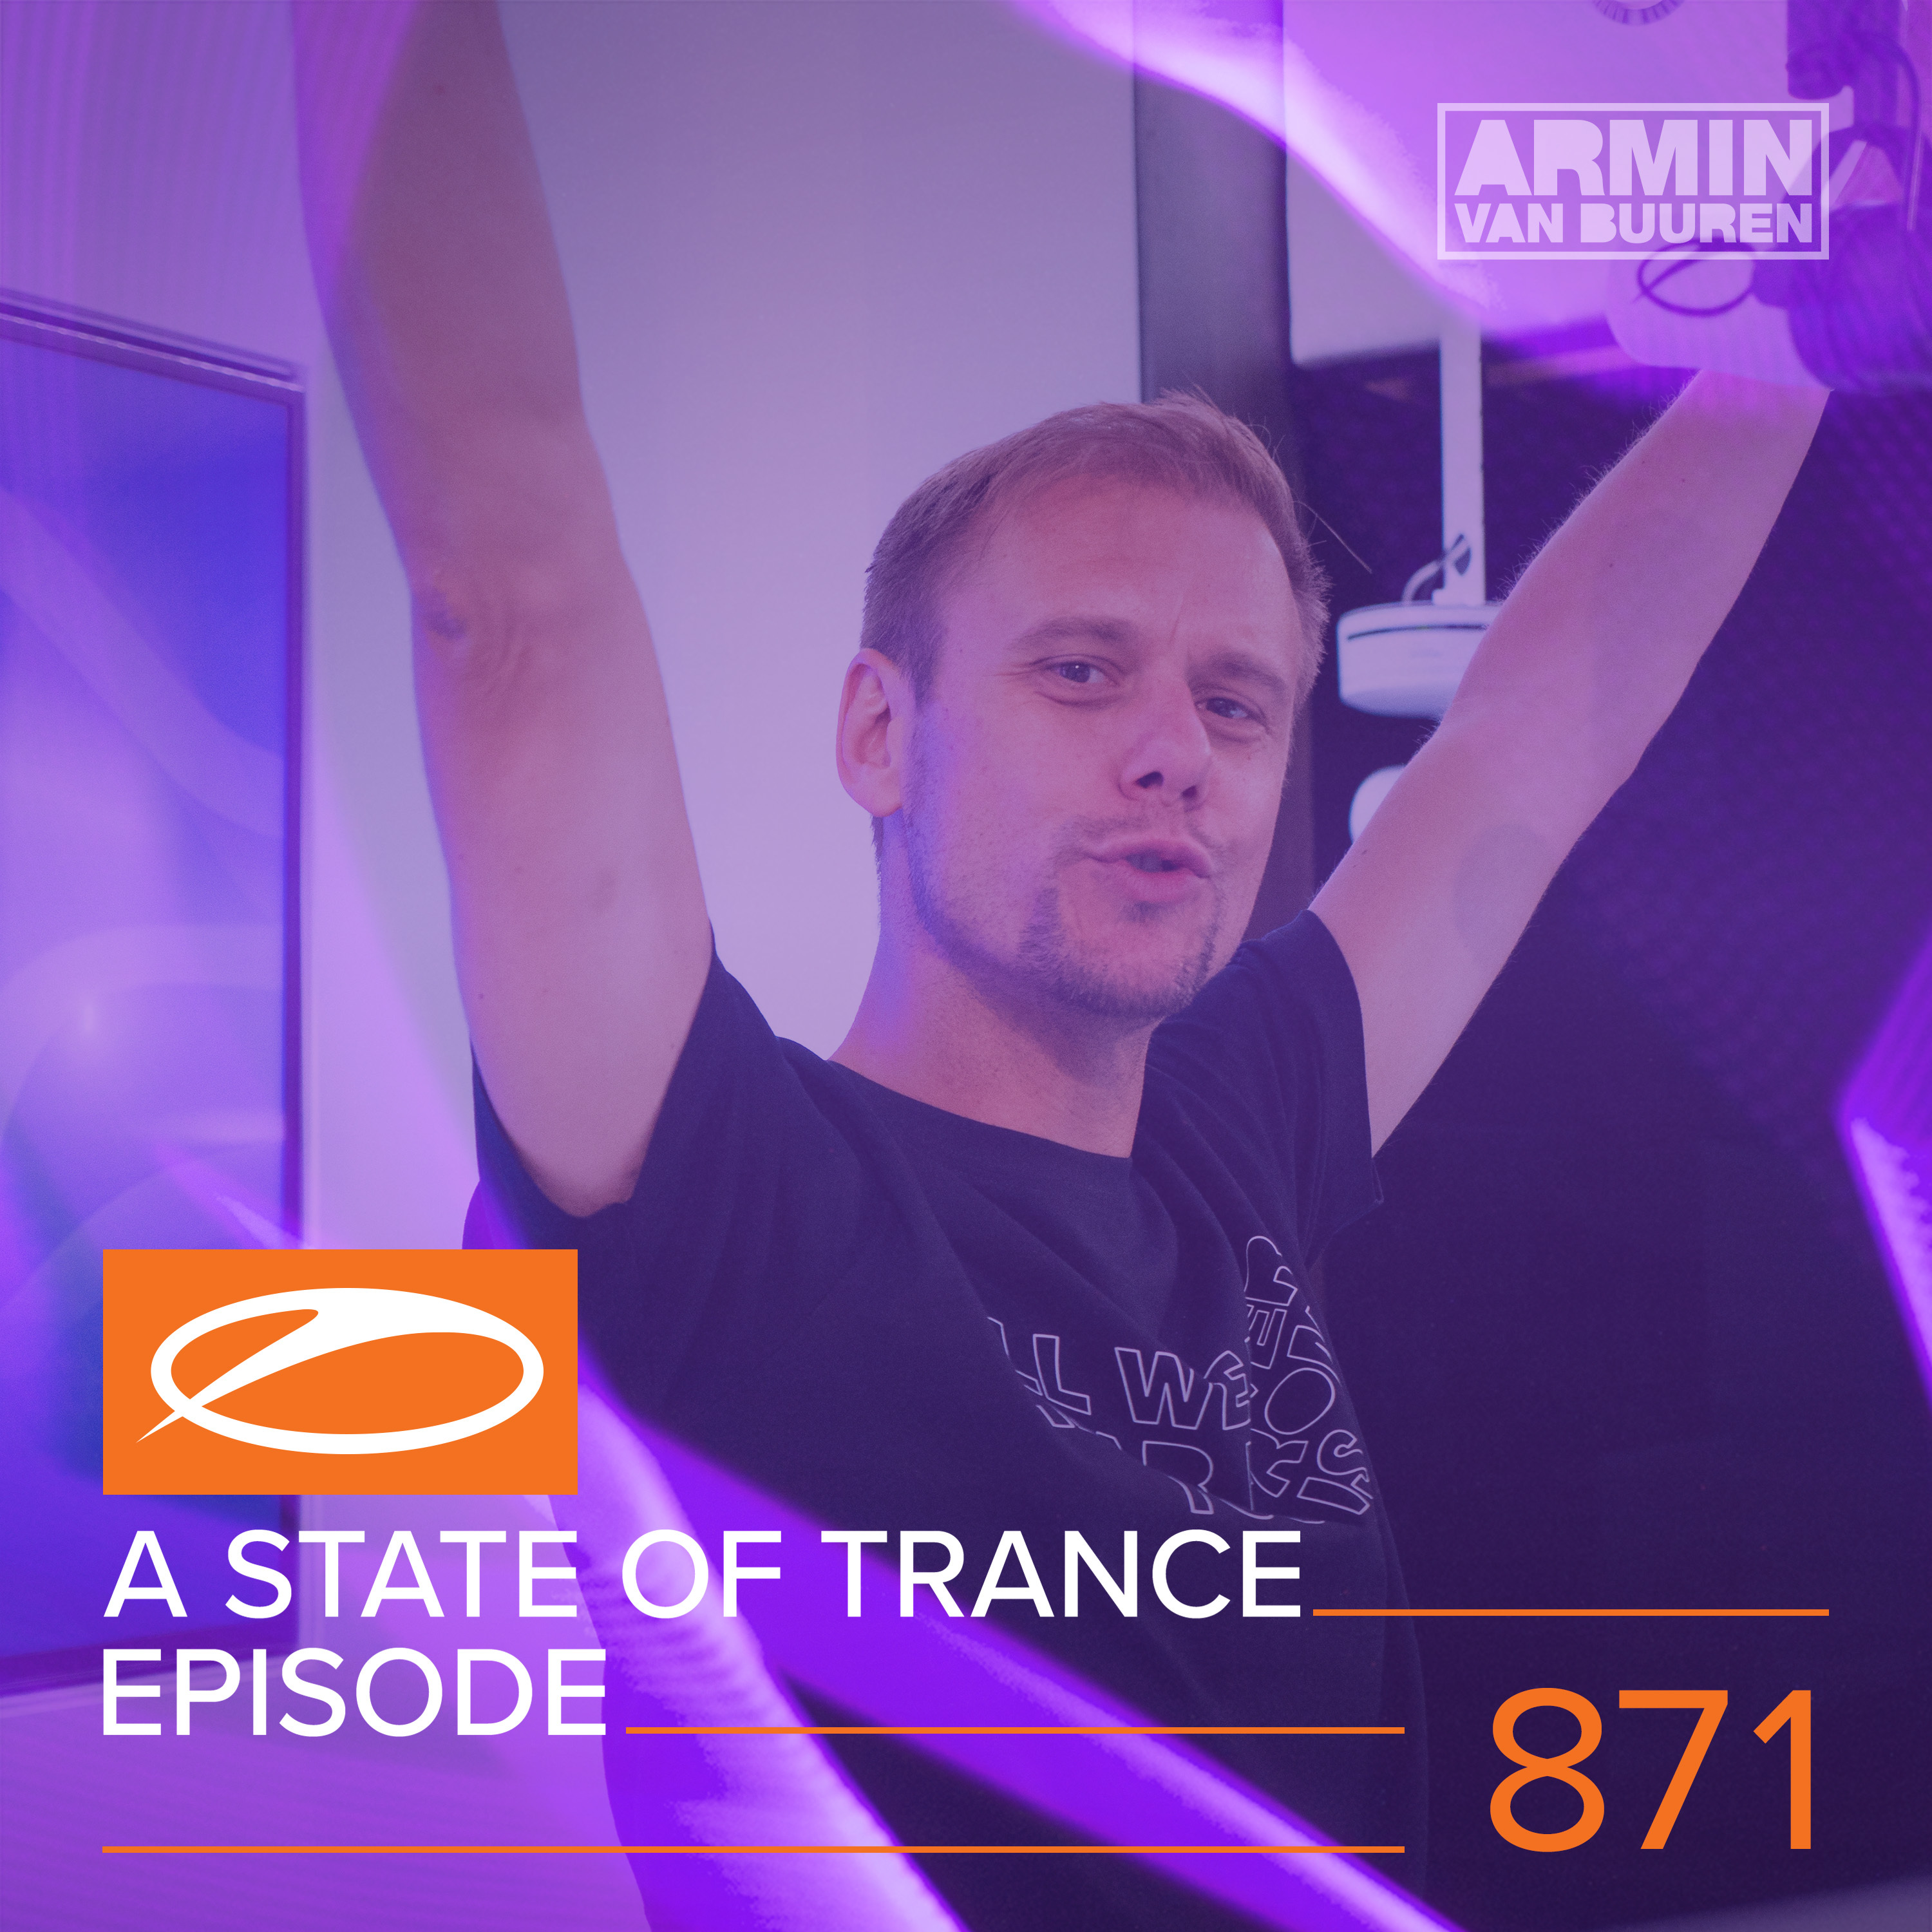 A State Of Trance Episode 871